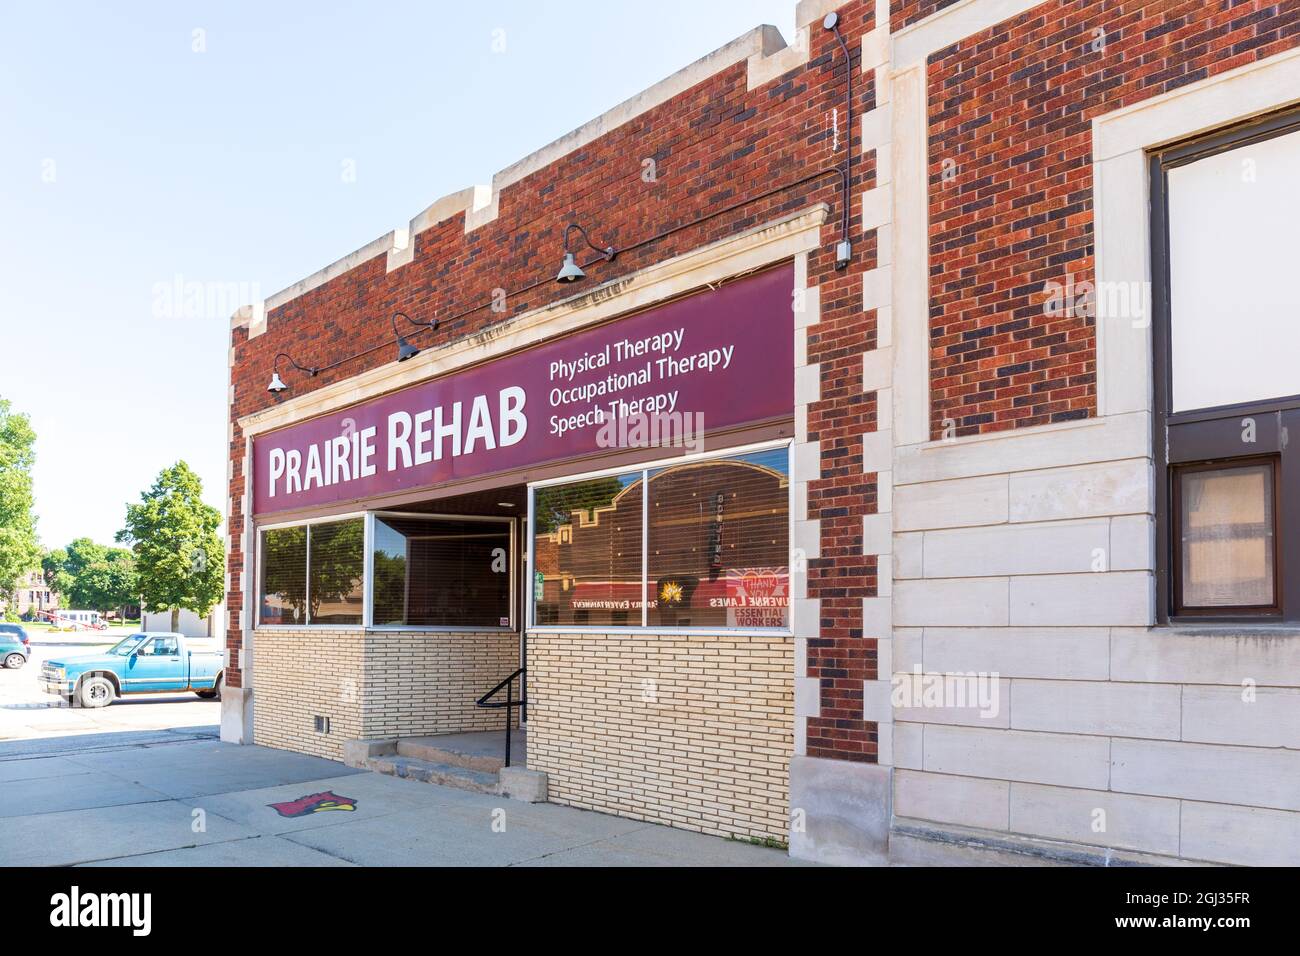 LUVERNE, MN, USA-21 AUGUST 2021: Prairie Rehab-Physical Therapy, Occupational Therapy, Speech Therapy.  Shows building front and sign. Stock Photo